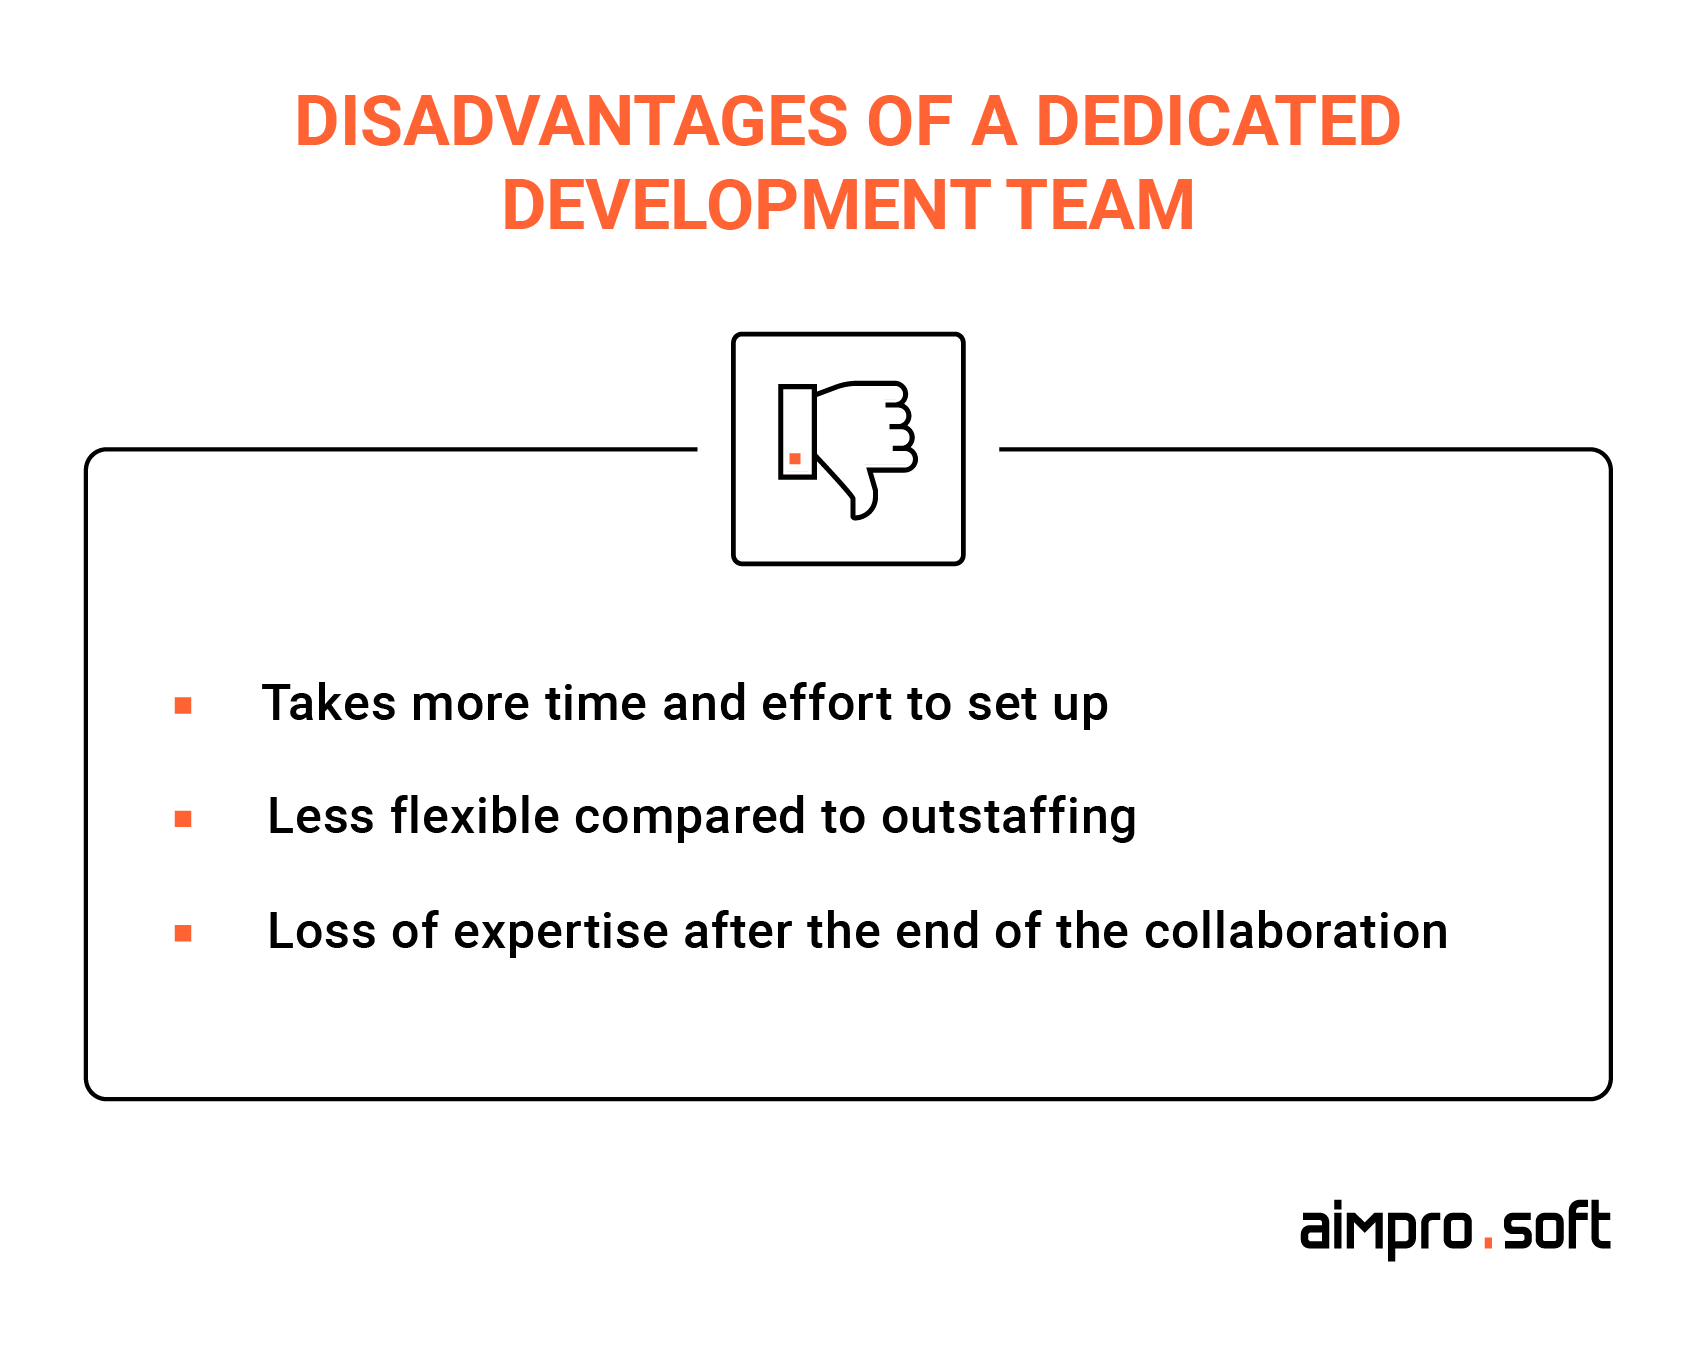 Drawbacks to cooperation with dedicated teams